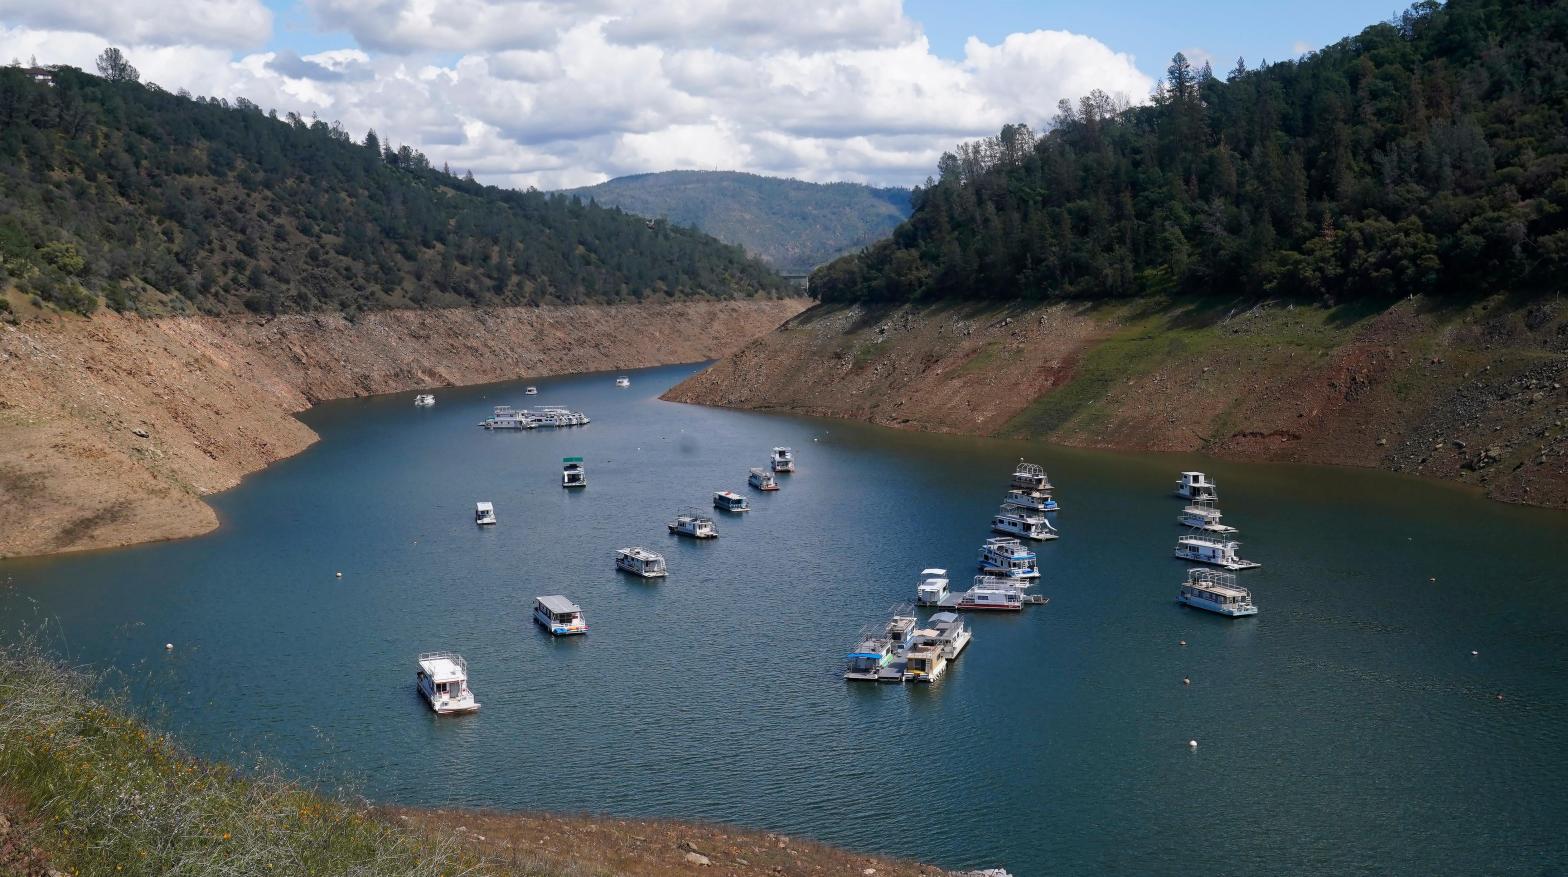 Houseboats sit in the drought-lowered waters of Lake Oroville, near Oroville, California.  (Photo: Rich Pedroncelli, AP)